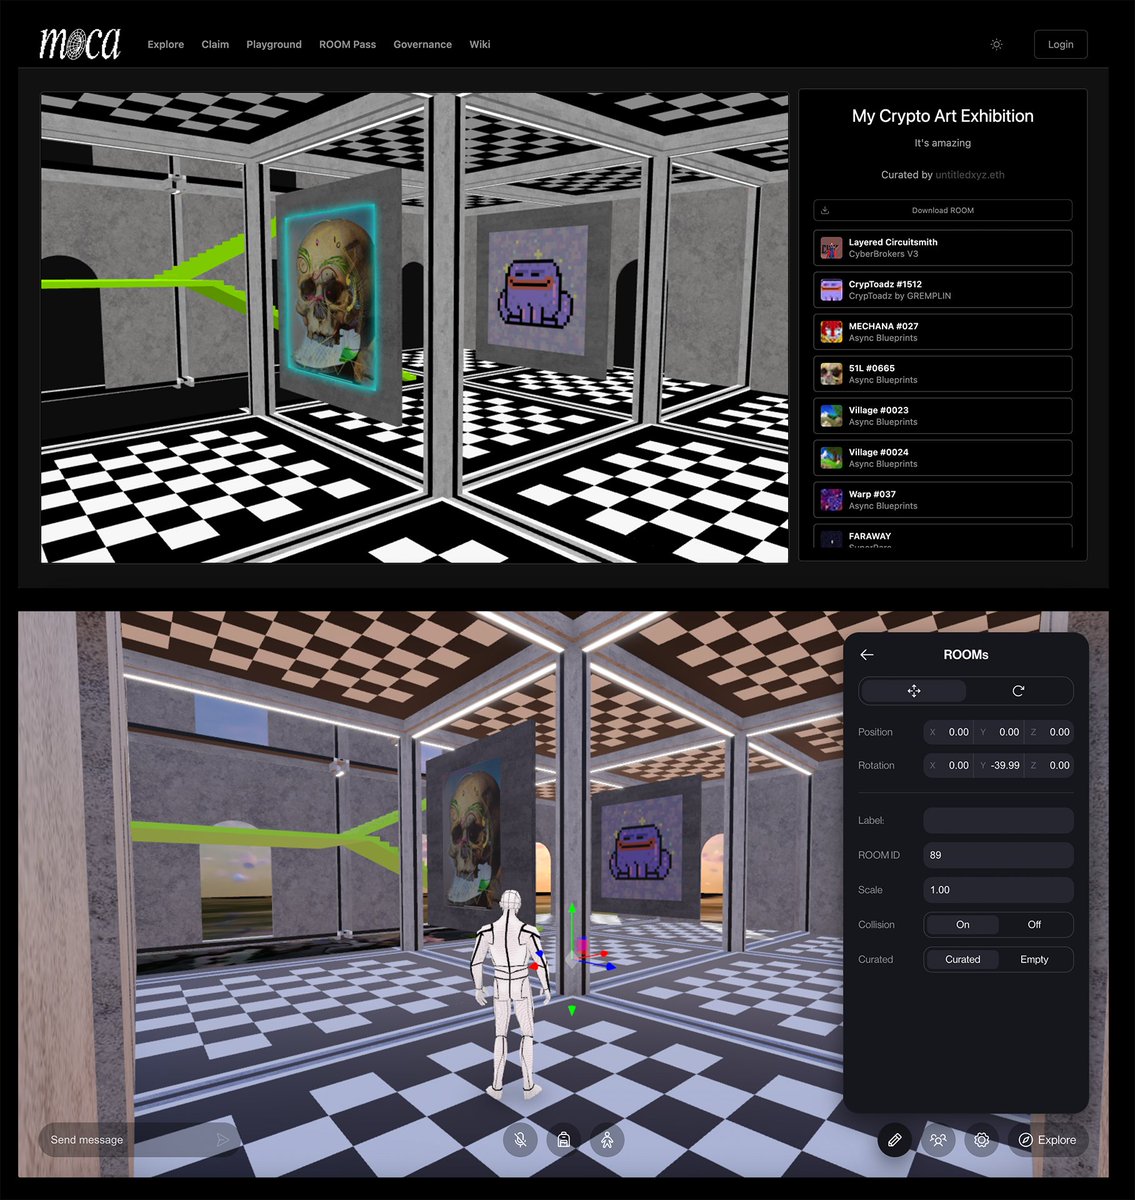 @FreakinFrick @natealexnft If you're looking for experiments in metaverse architecture - I'm biased but @MuseumofCrypto ROOMs are wildly advanced, interoperable 3D NFTs. 🏛️ each is a 3D museum 🖼️ MOCA dapp maps 2D NFTs to walls 🔗 curation stored on-chain 🌐 full museum can be streamed to @hyperfy_io